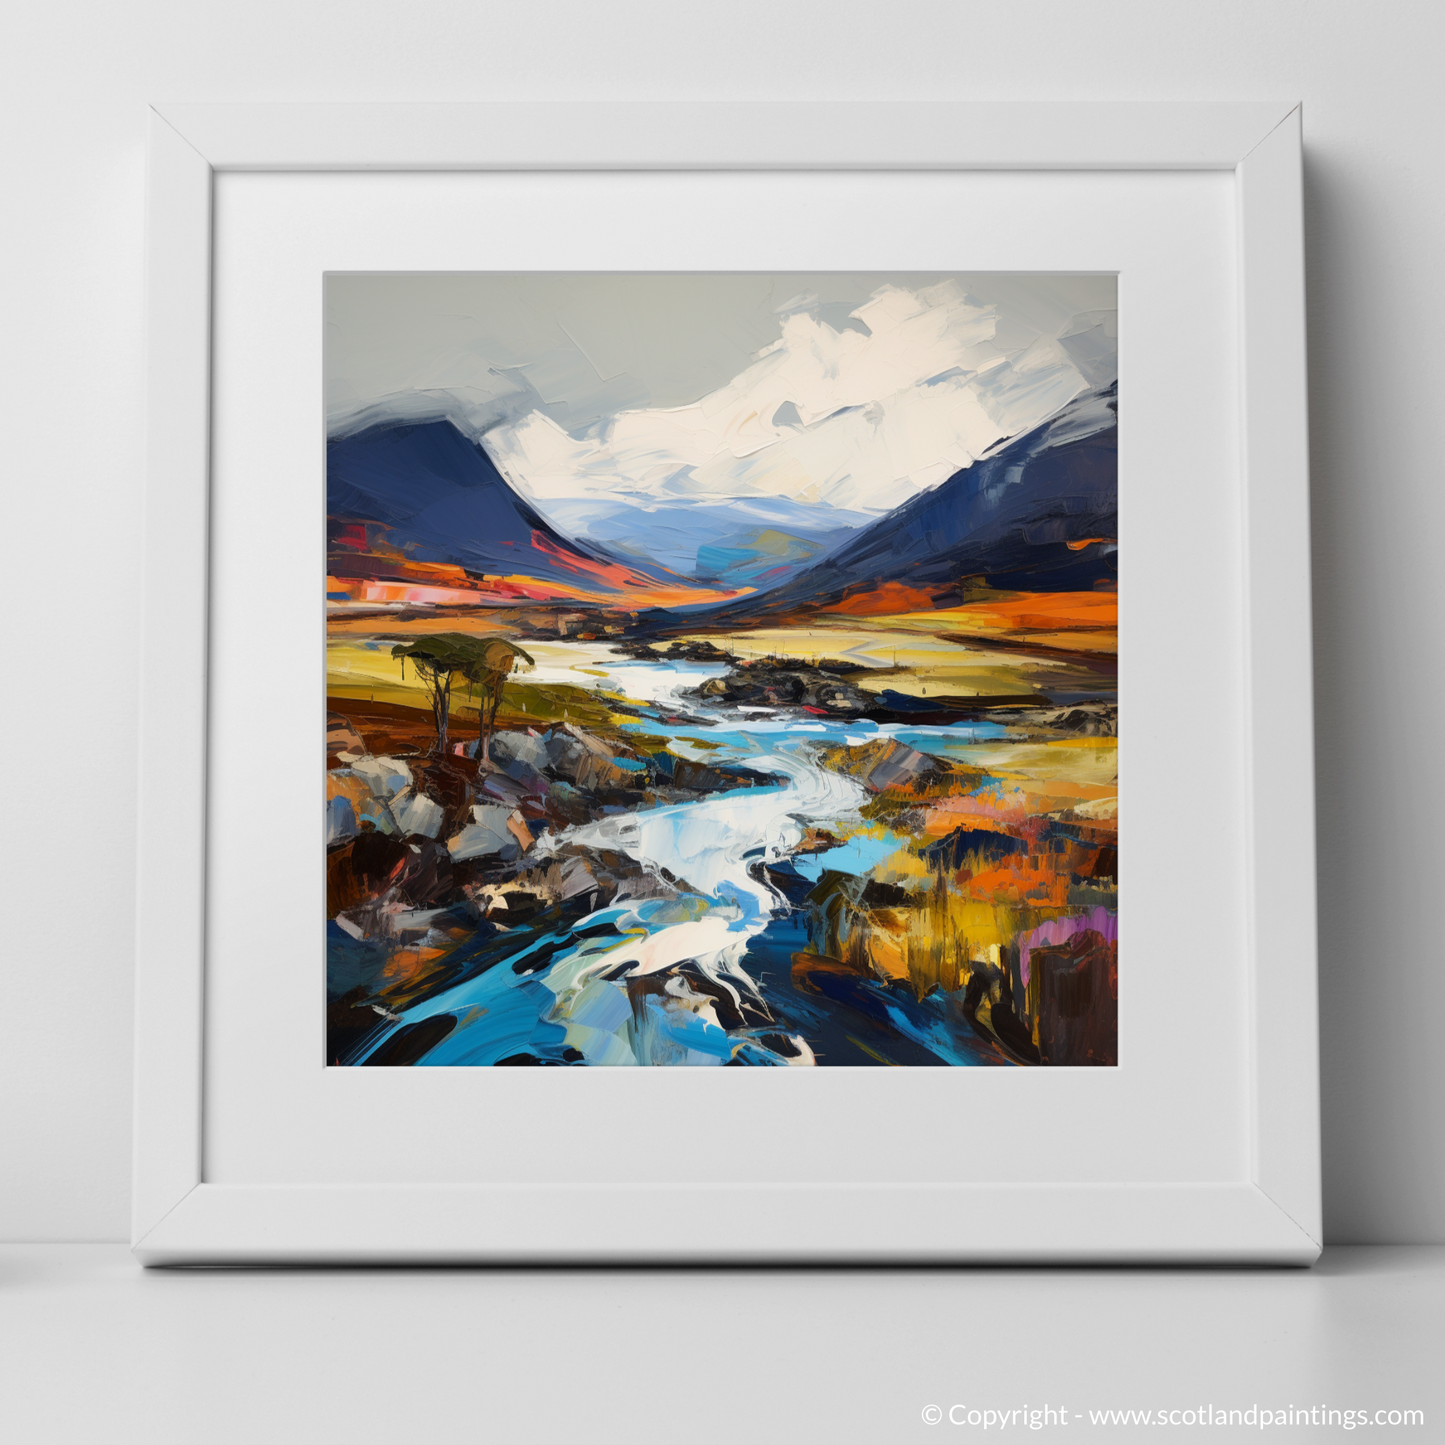 Art Print of Geal-chàrn (Drumochter) with a white frame